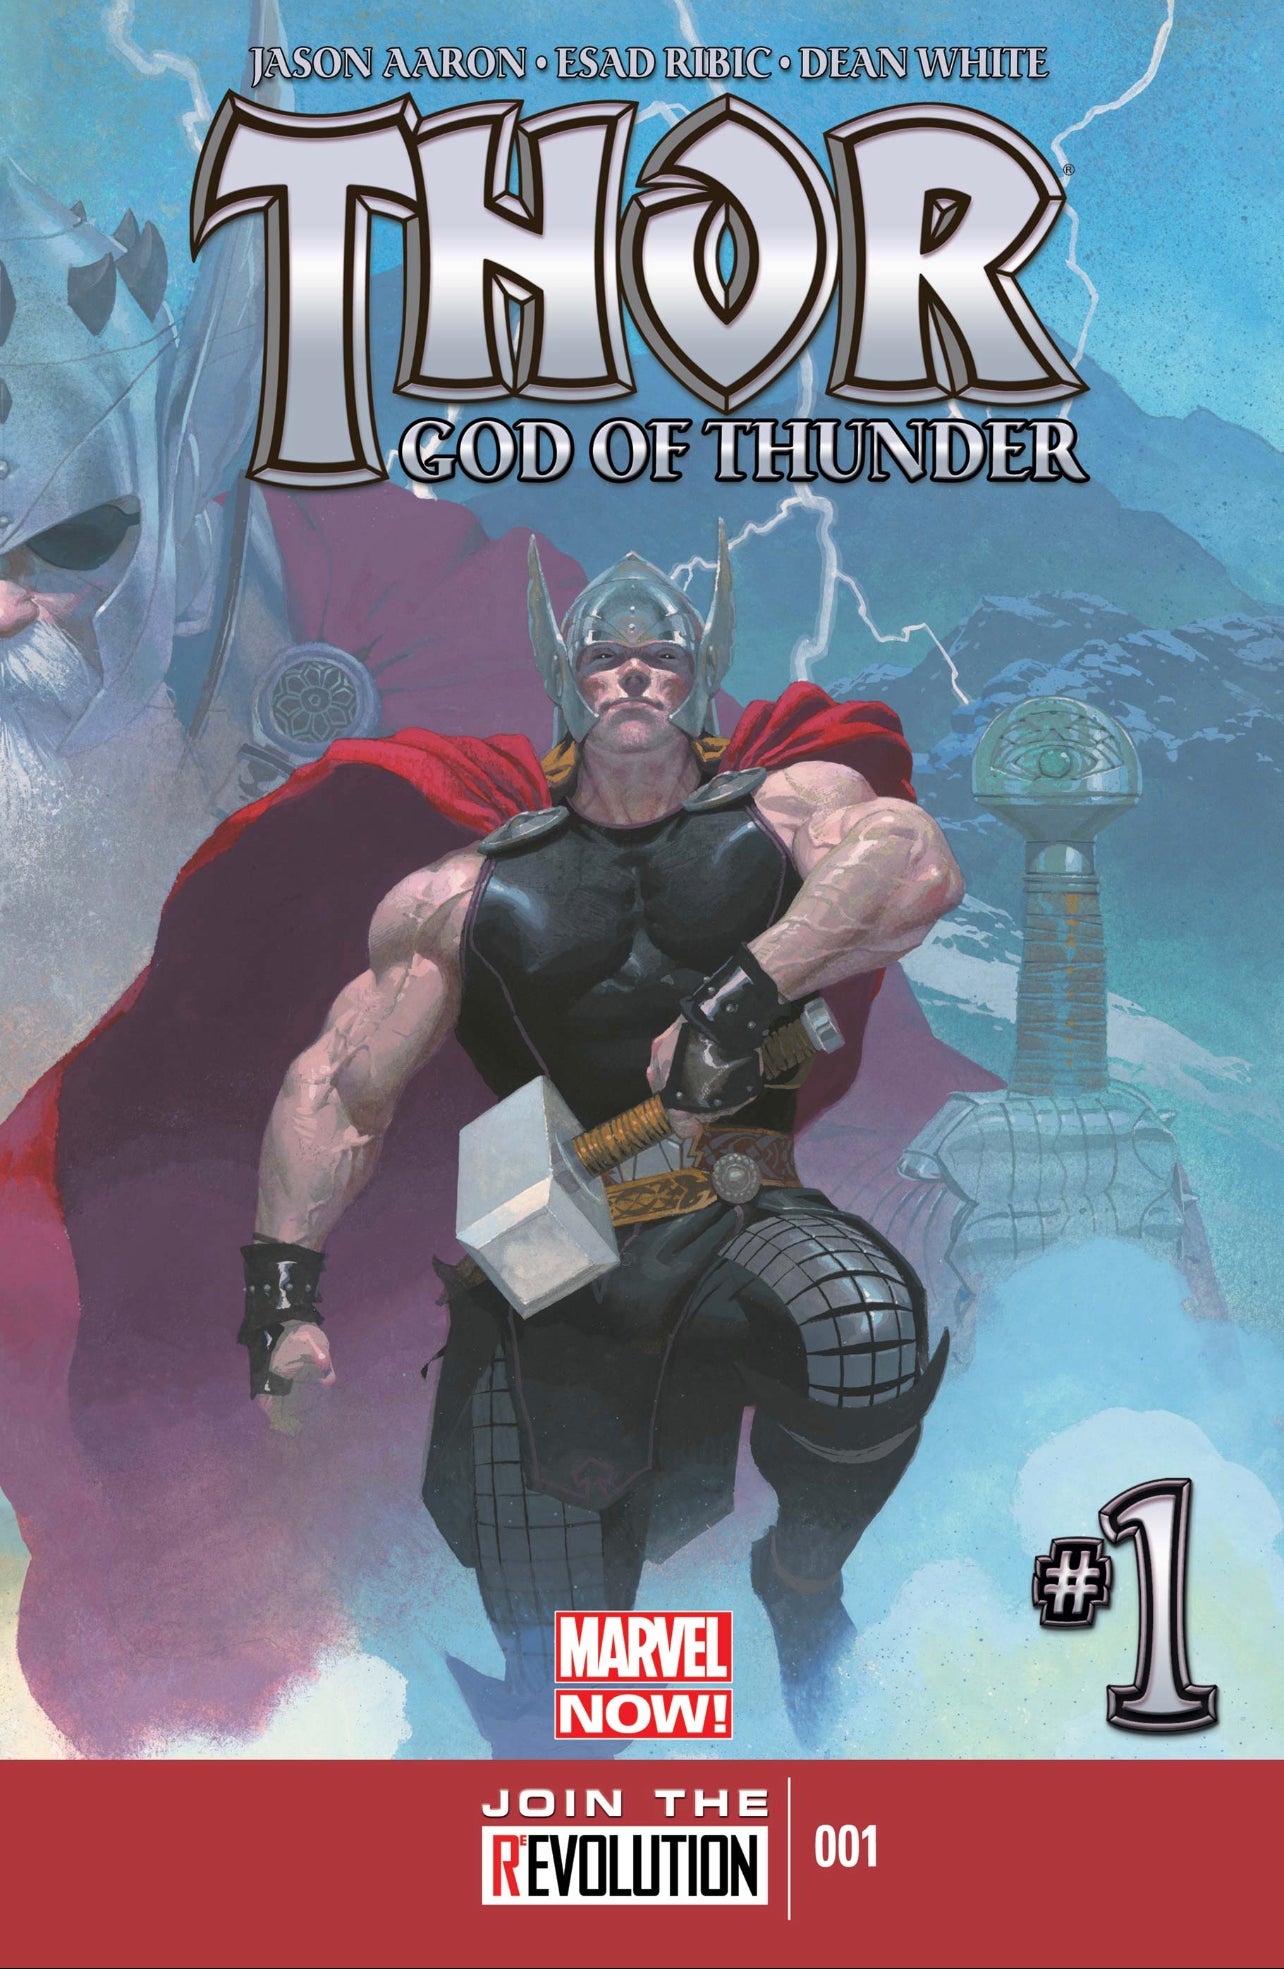 Image for How Jason Aaron's Thor comics changed the God of Thunder forever